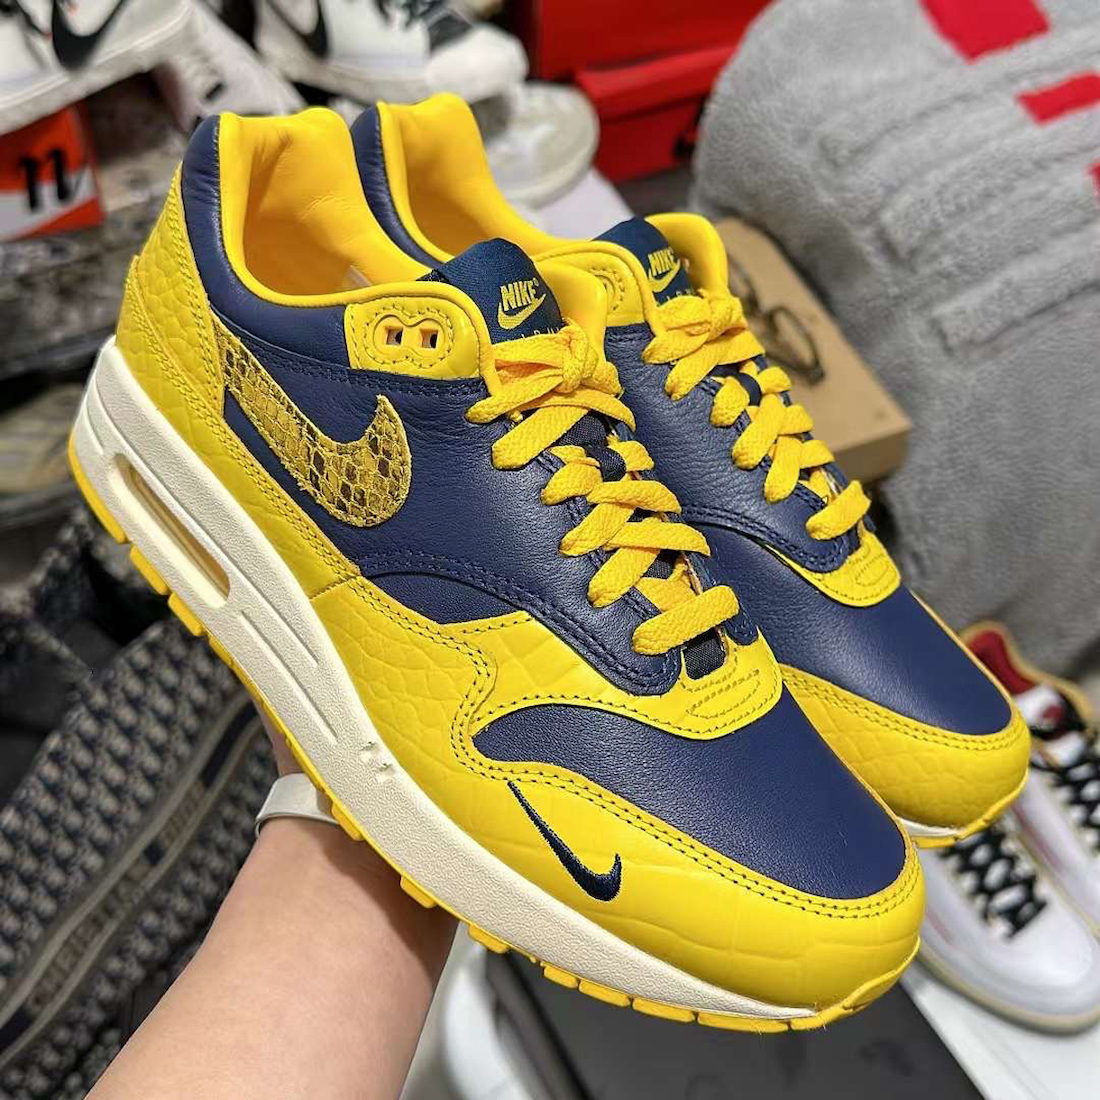 Nike Air Max 1 Midnight Navy Varsity Maize FJ5479-410 Release Date